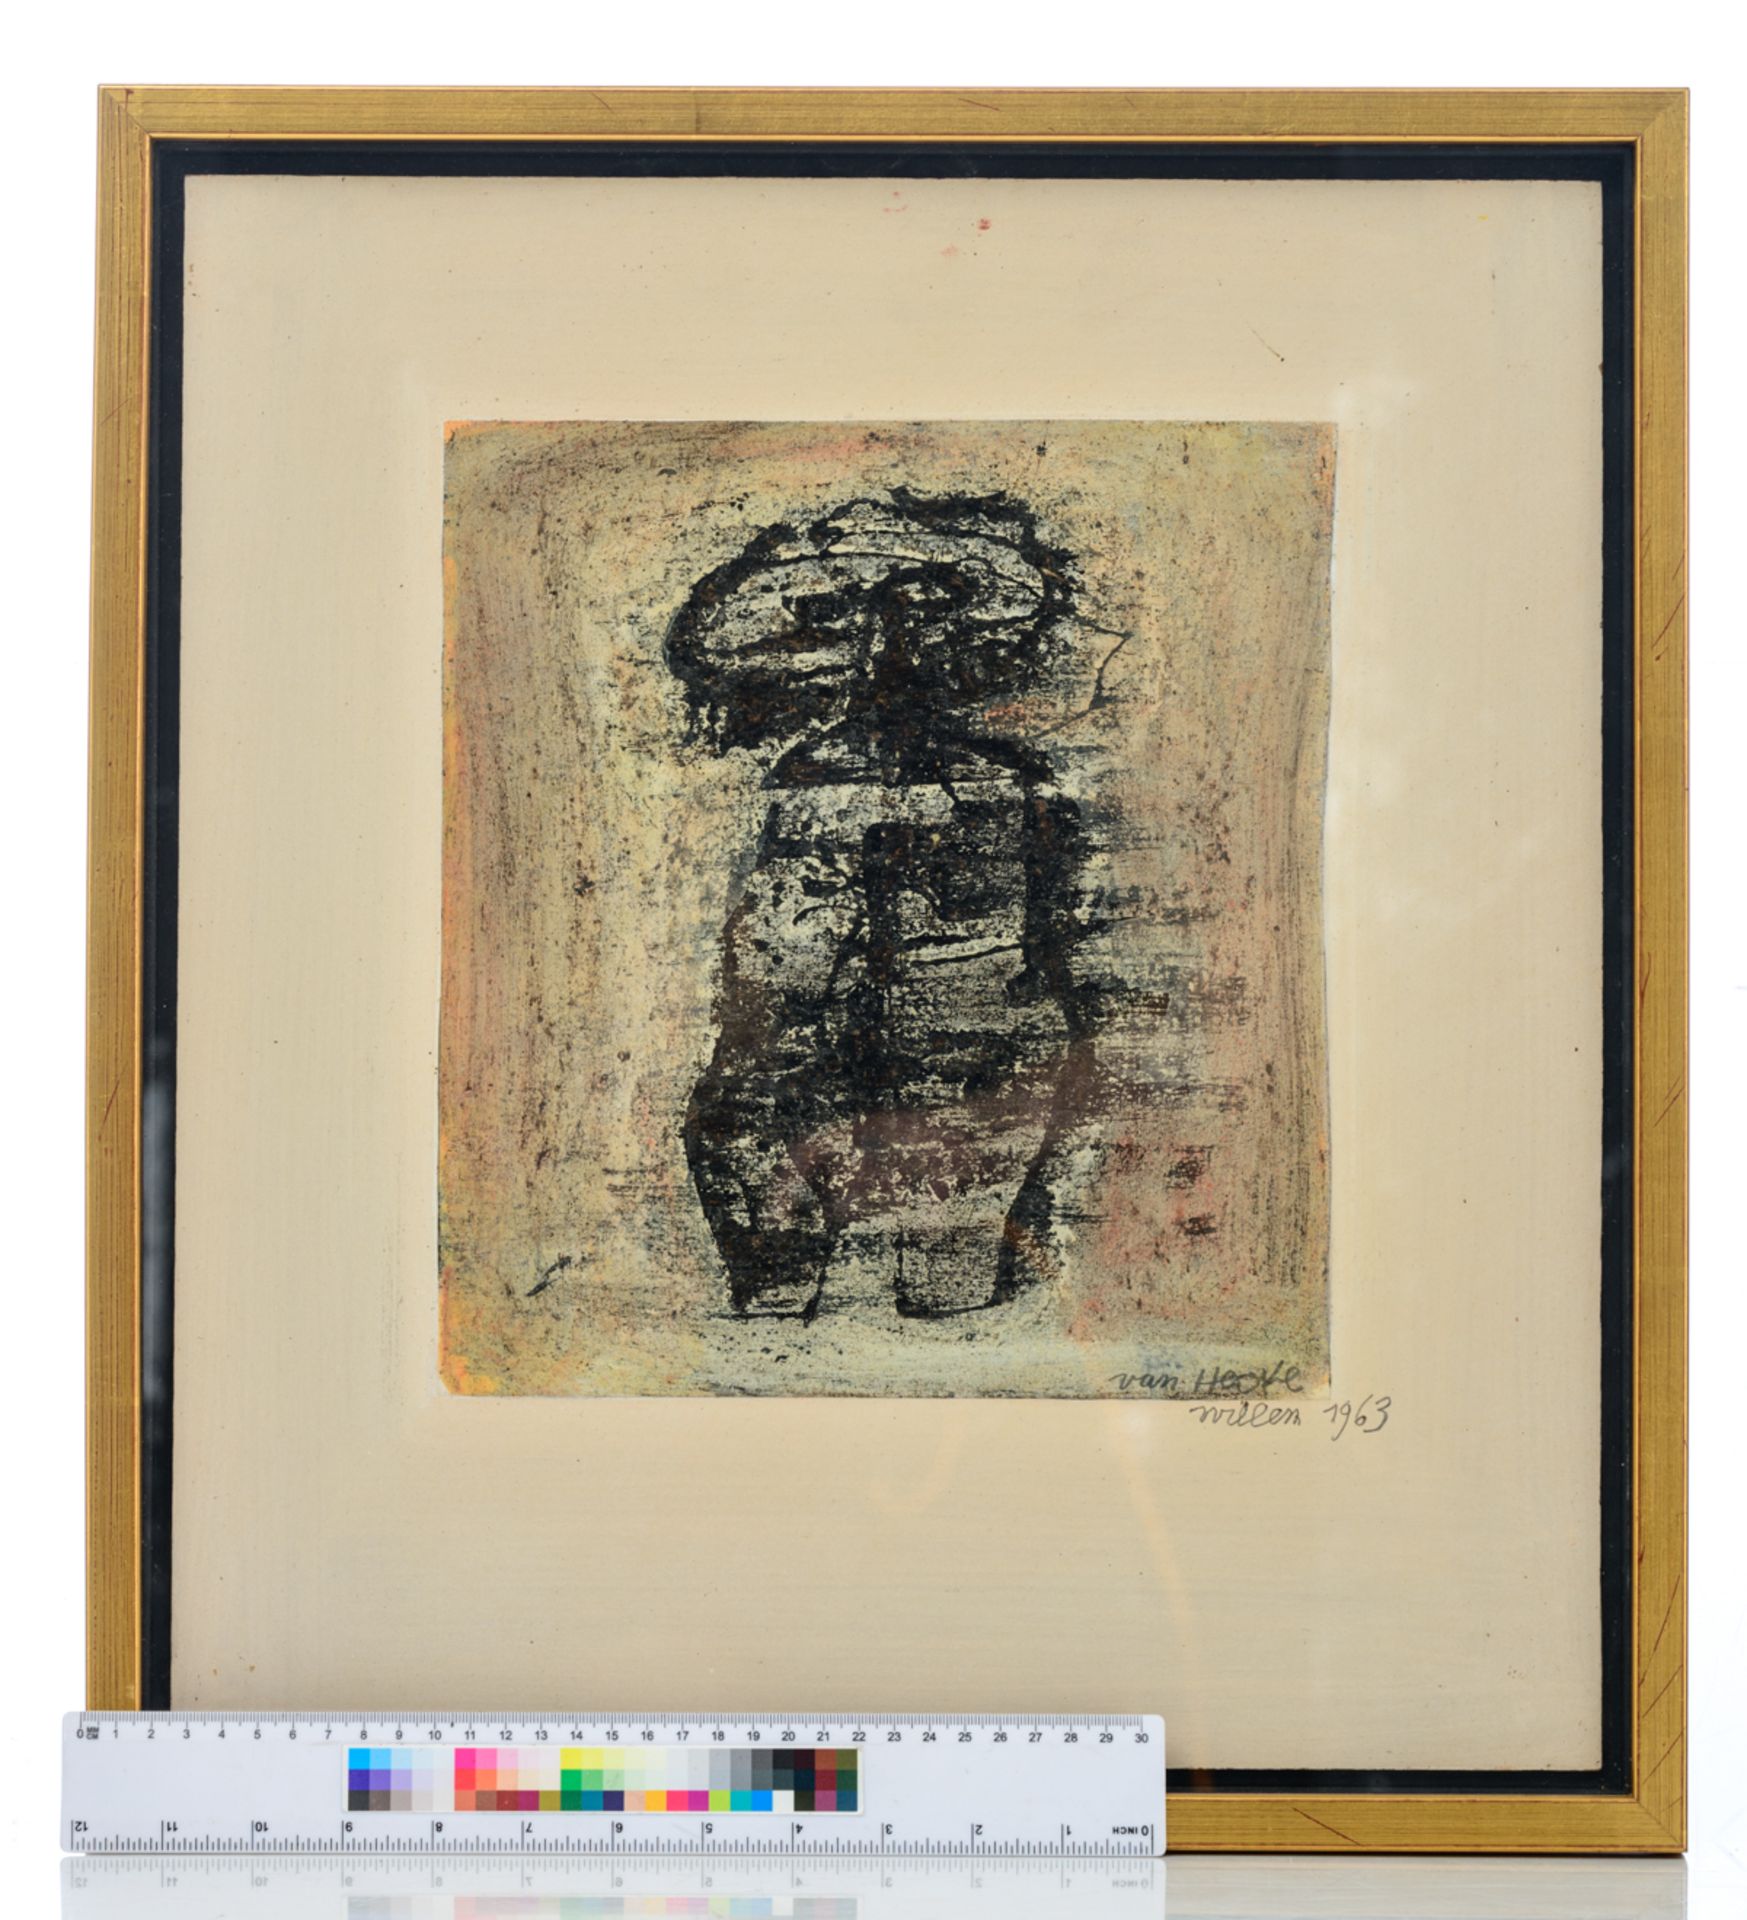 Van Hecke W., four untitled works, dated 1957, 1963, 1963 and 1964, mixed media, 34 x 40 - 40 x 45 c - Image 5 of 14